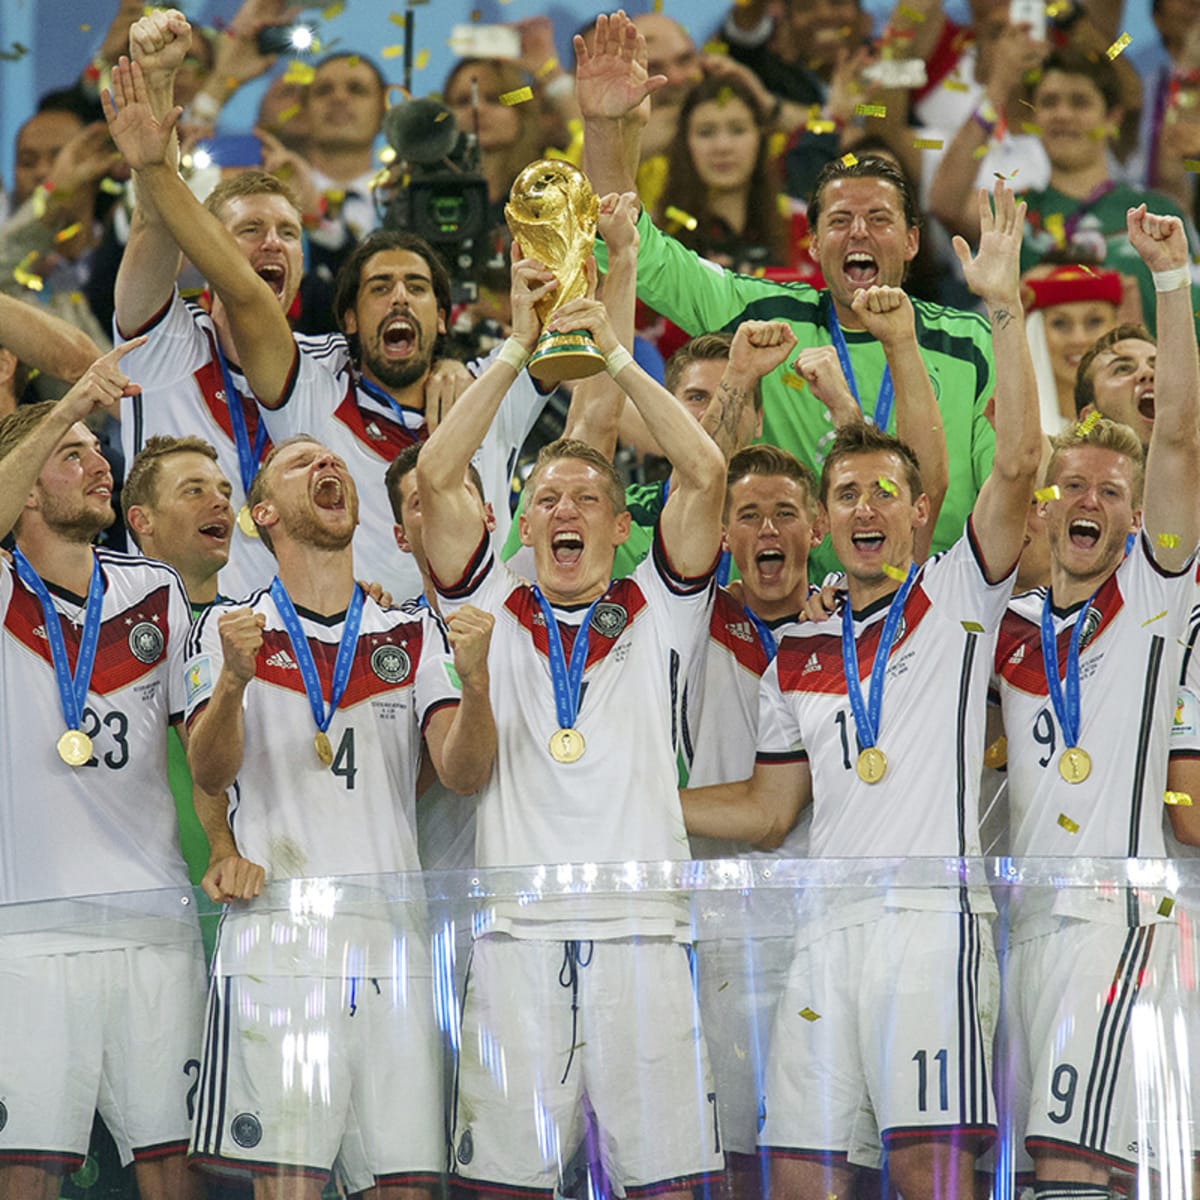 2014 World Cup final: Germany beats Argentina for fourth title